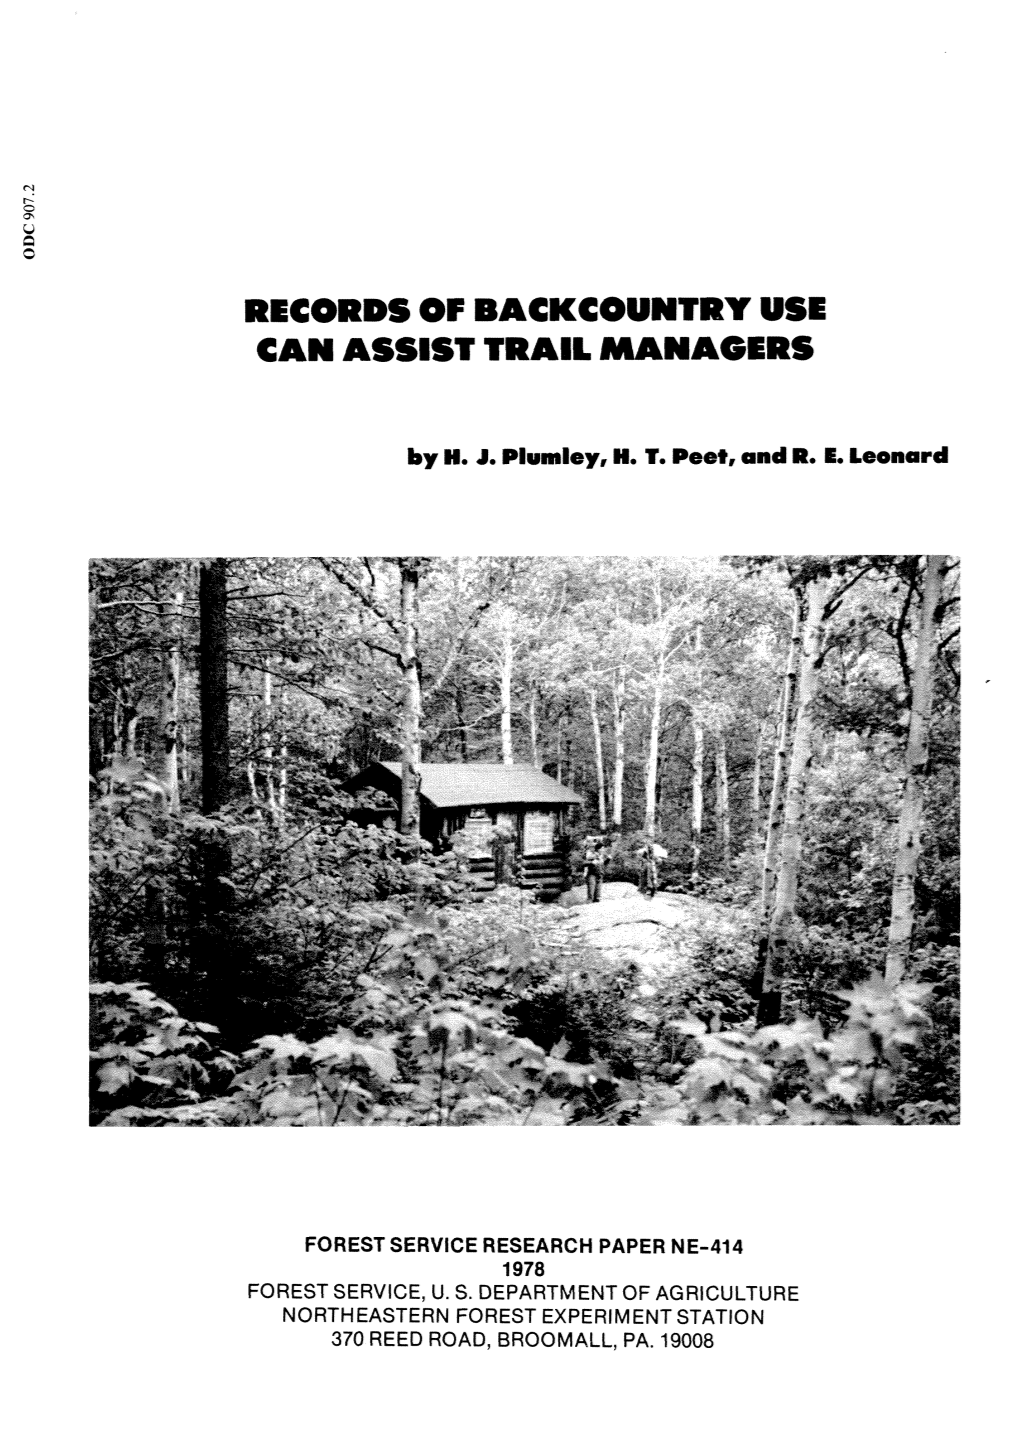 Records of Backcountry Use Caw Assist Trail Managers